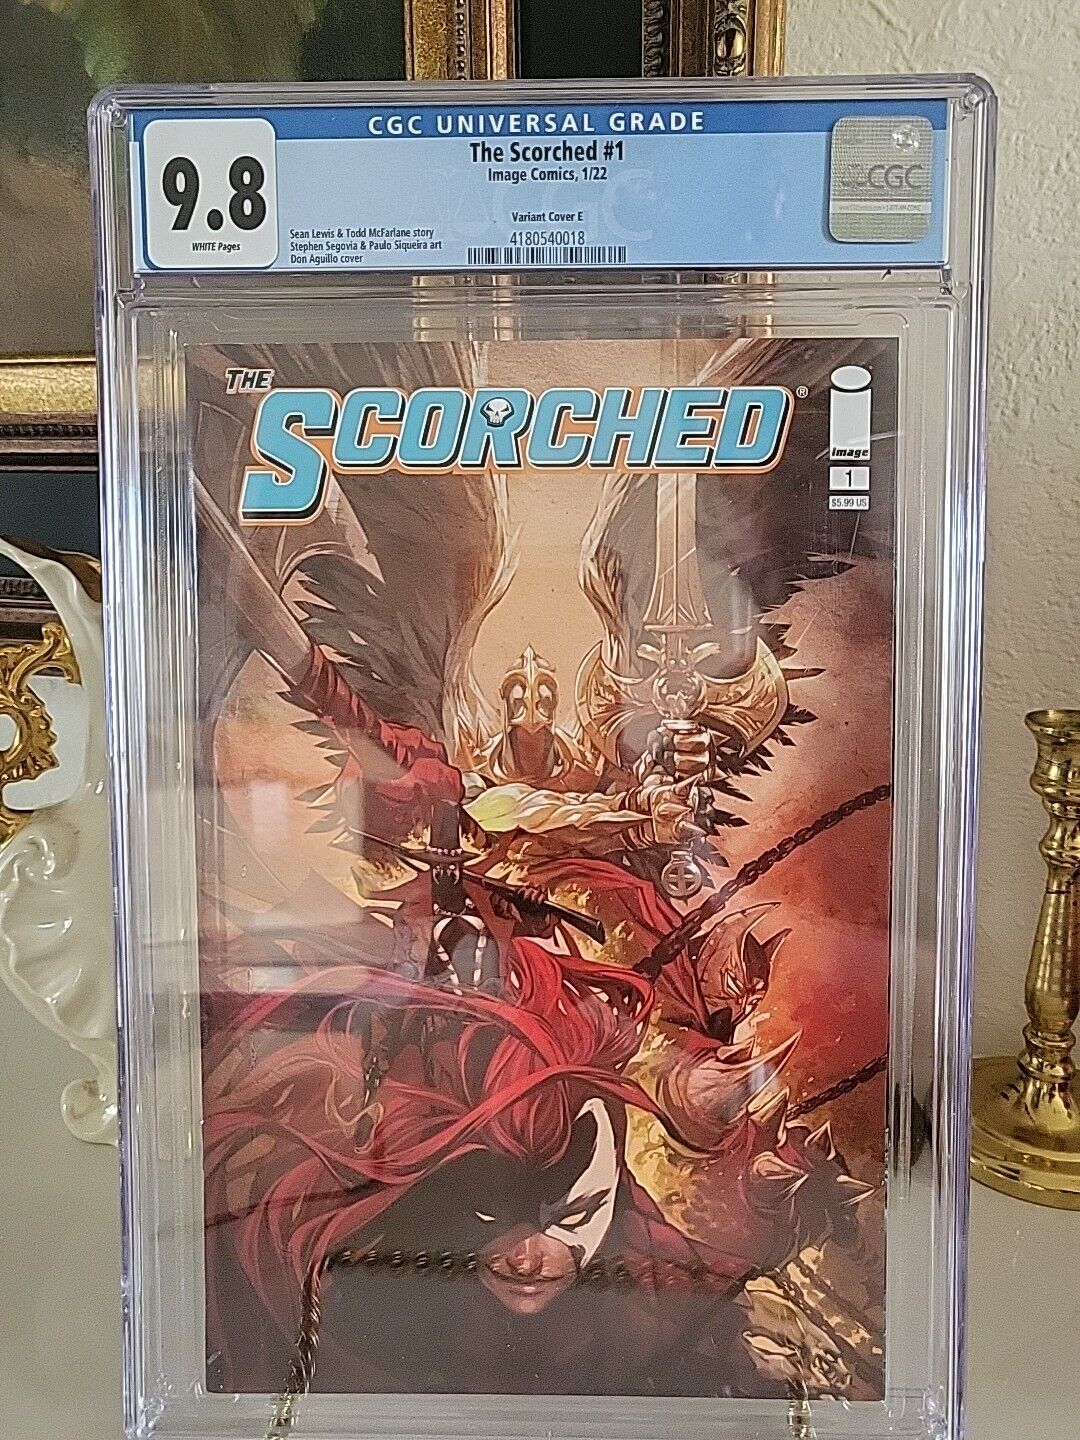 The Scorched #1 CGC 9.8 Variant Cover E Don Aguillo Cover Todd Mcfarlane 